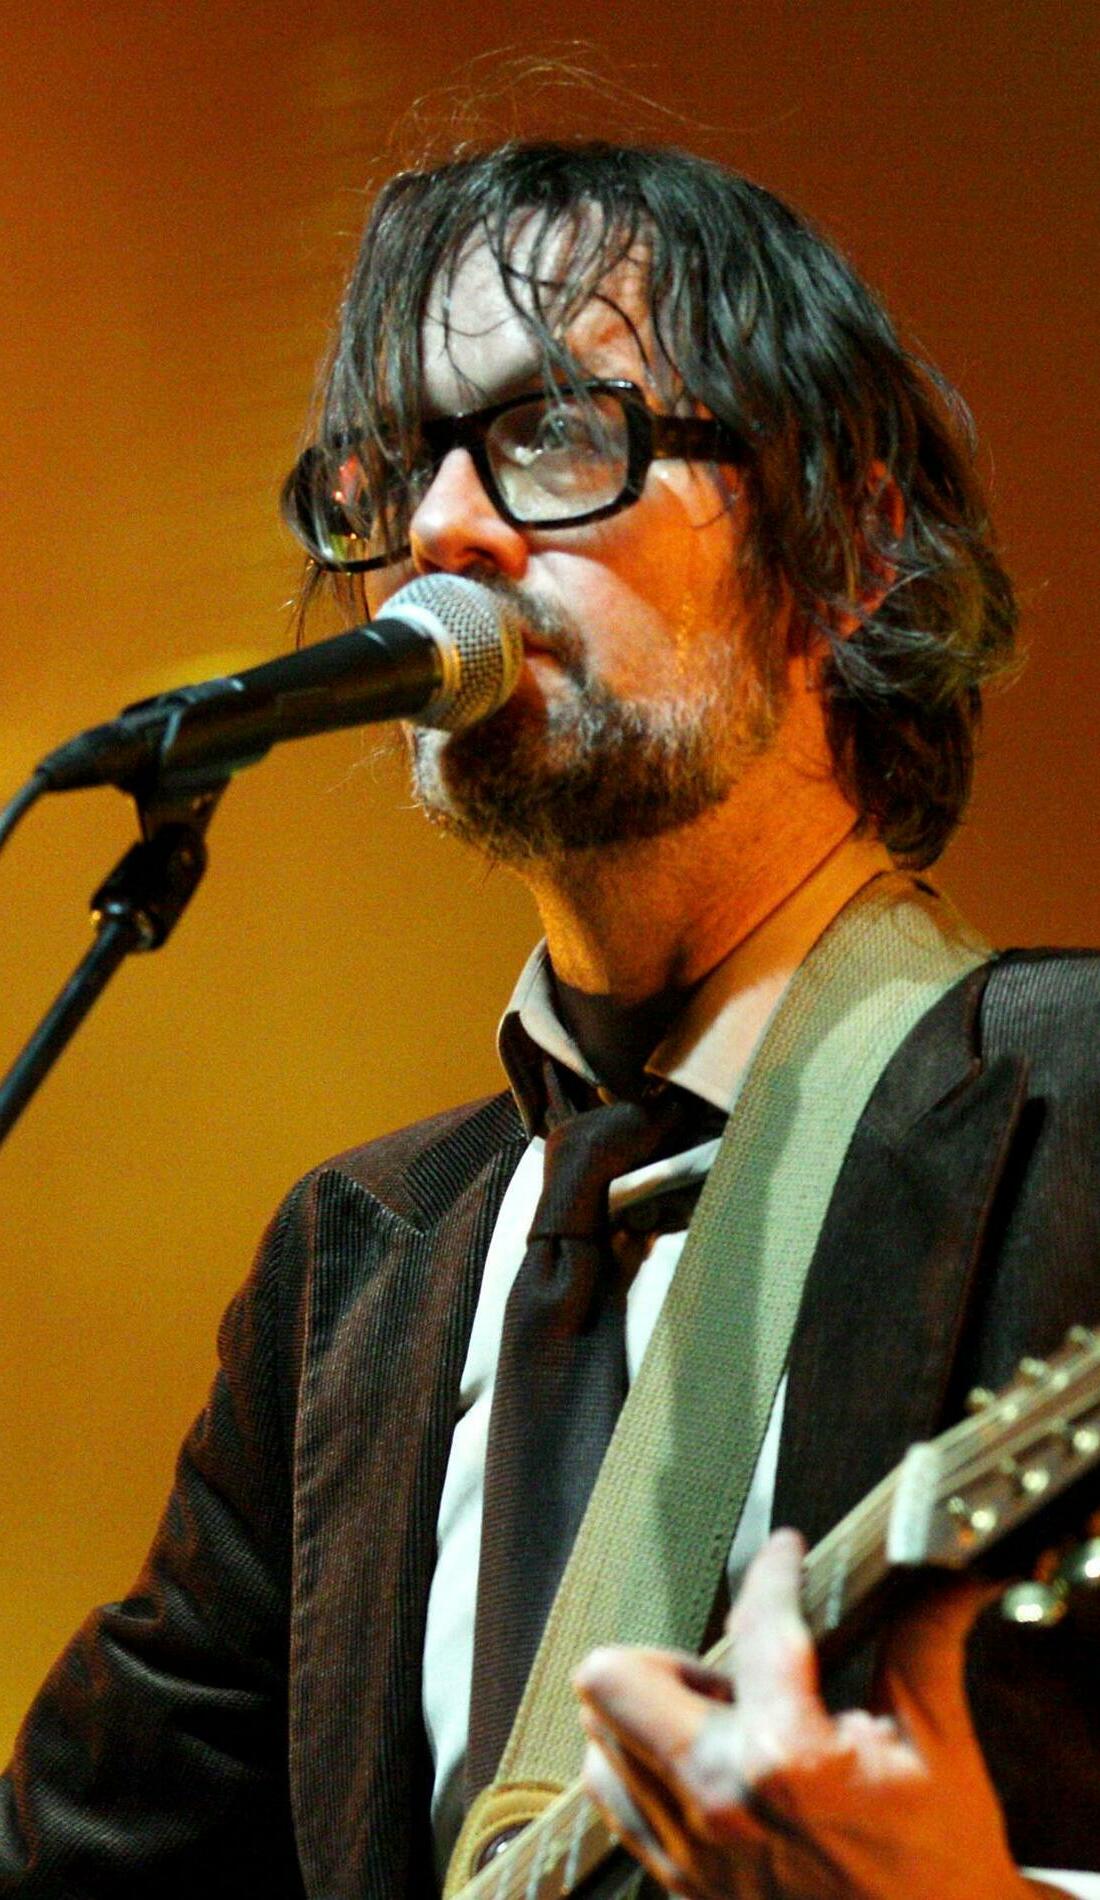 A Jarvis Cocker live event